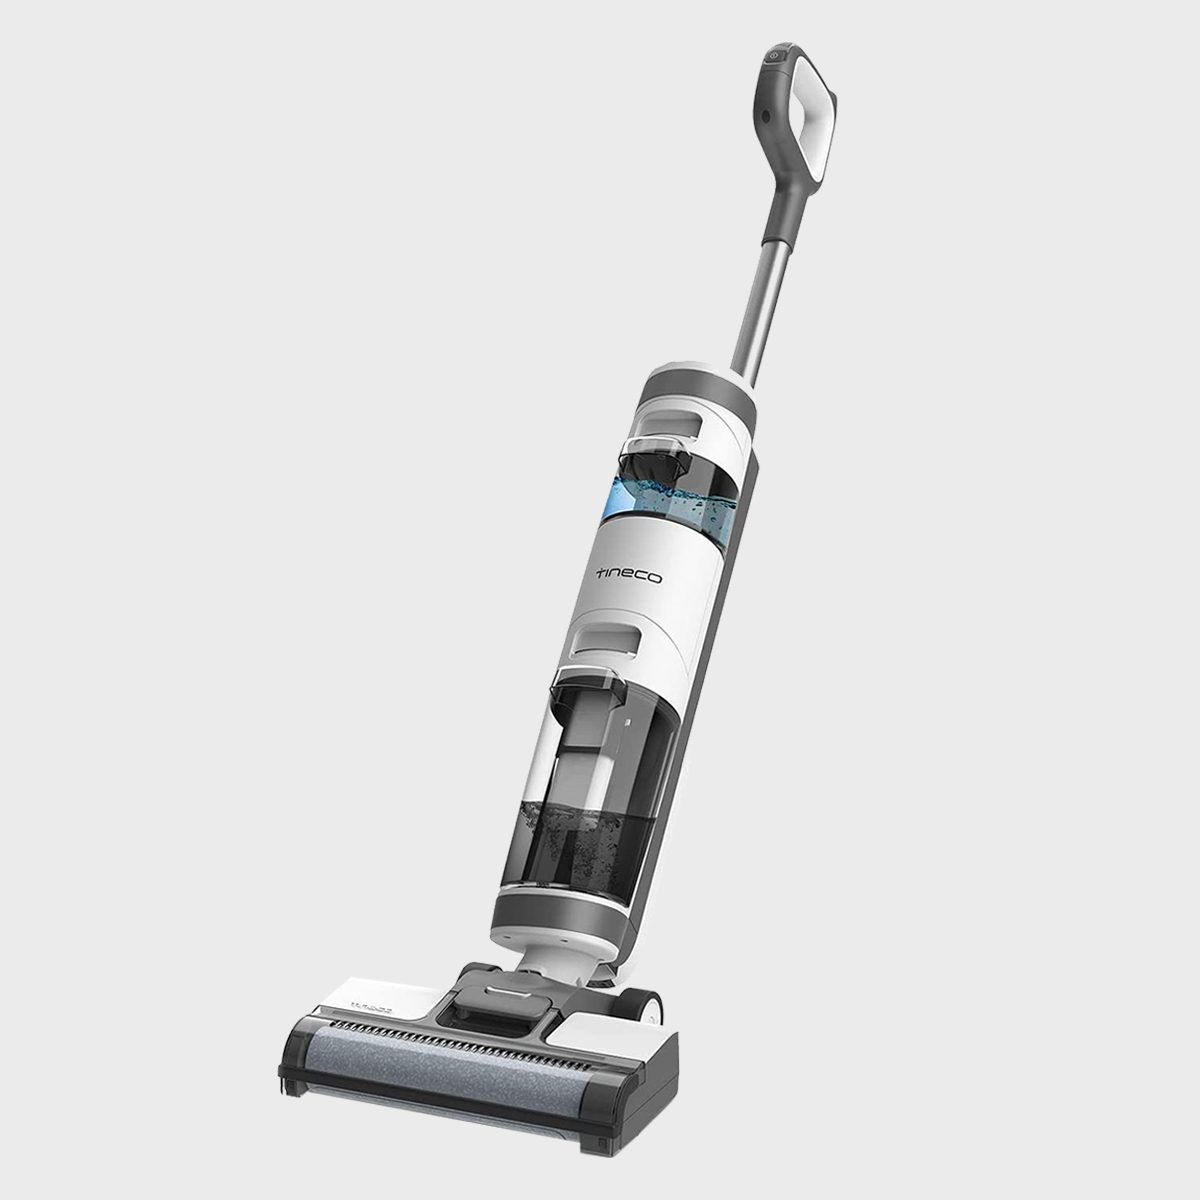 Tineco iFloor 3 Review 2023, How the Vacuum Mop Held Up After 2 Years